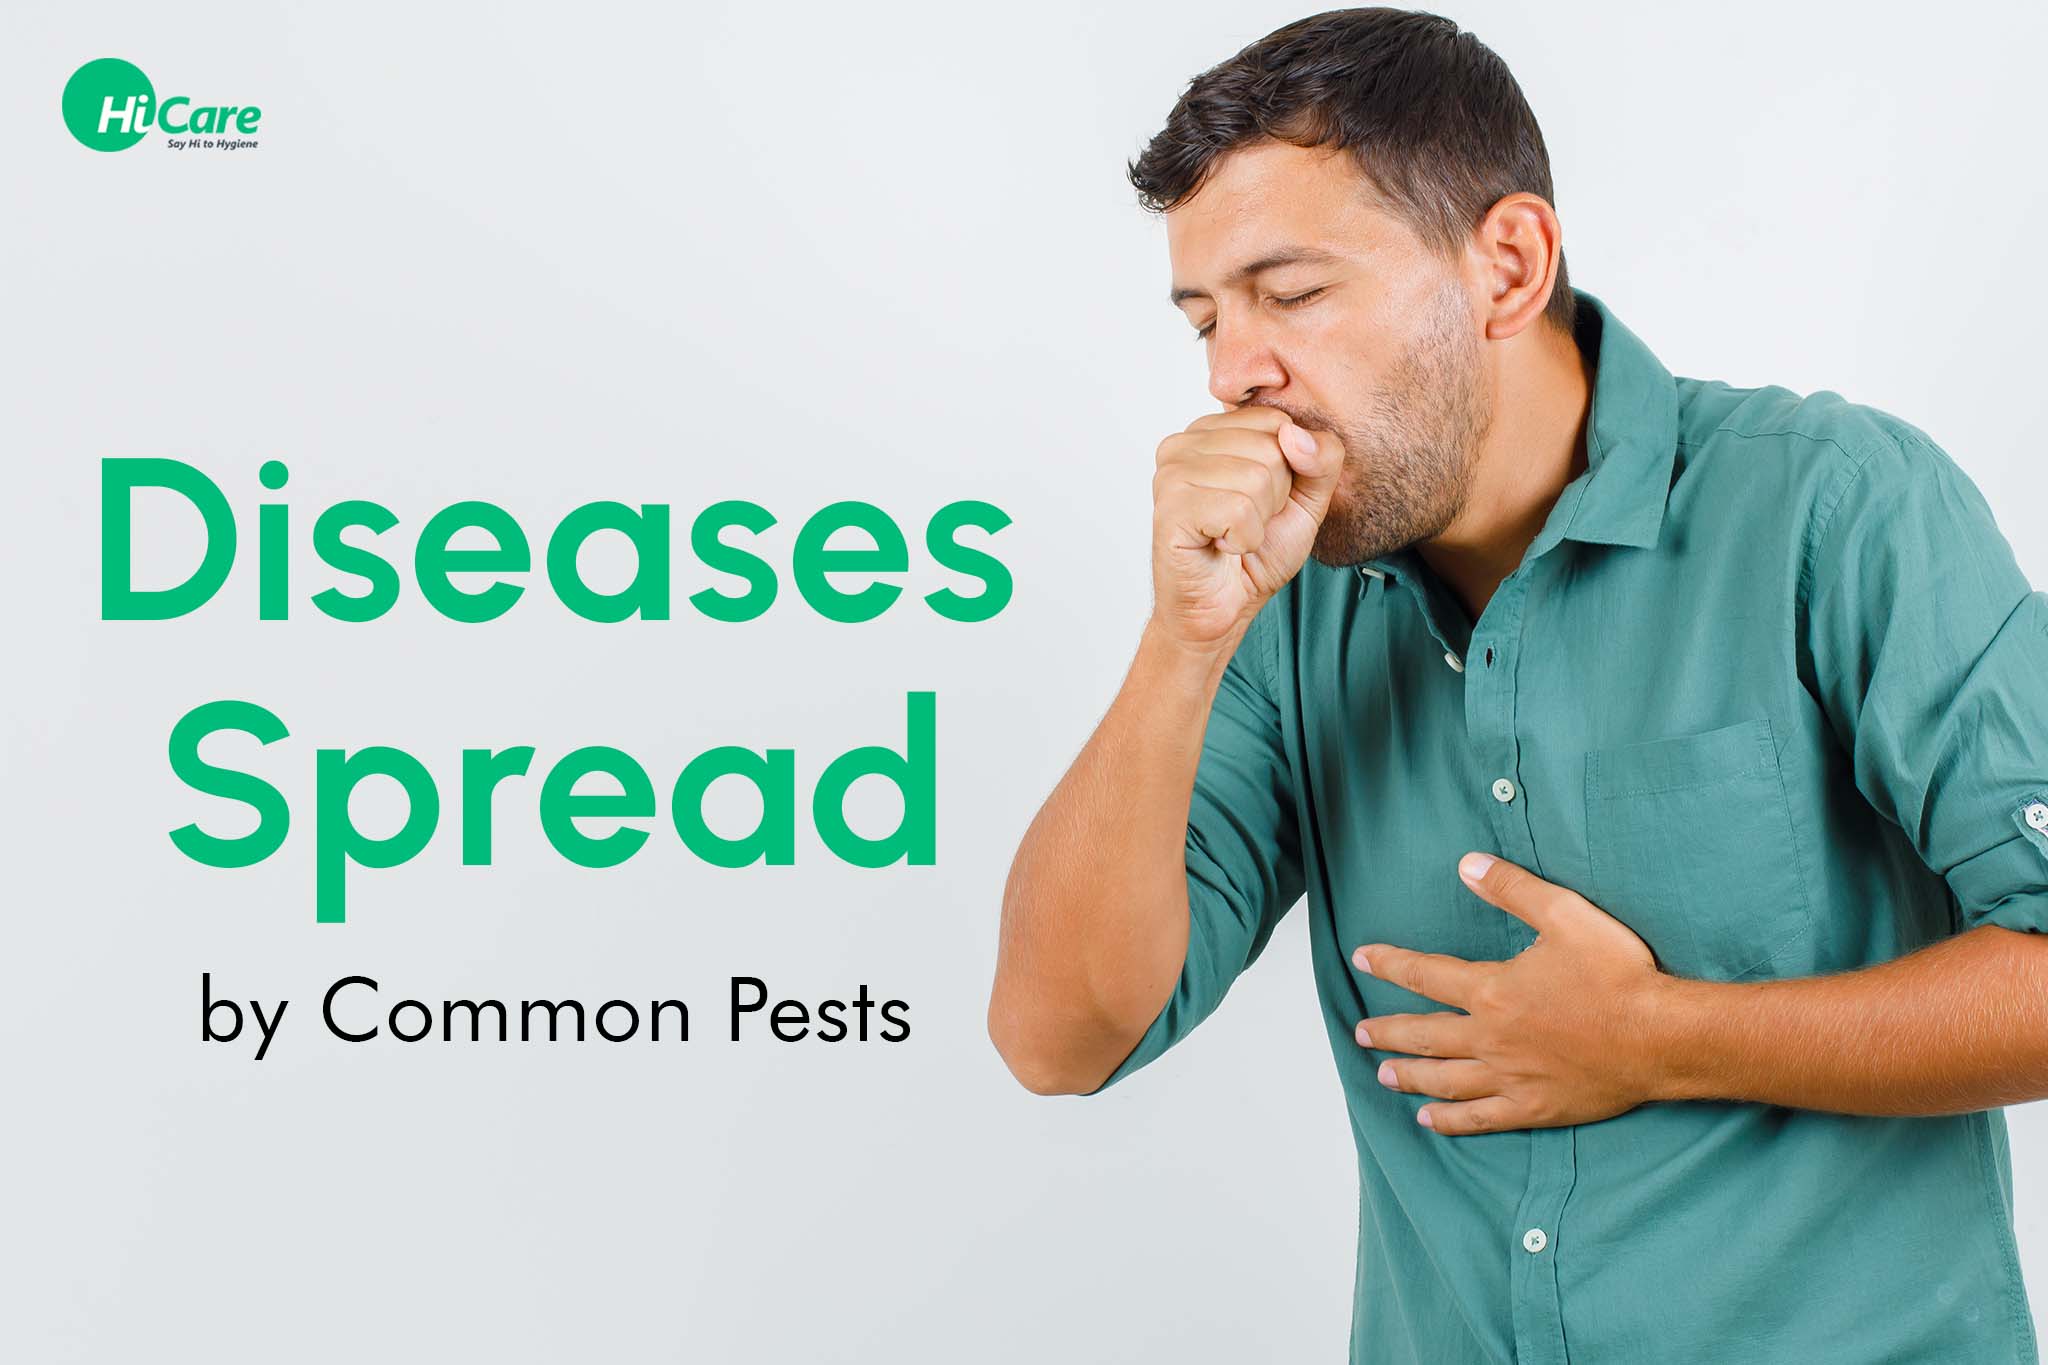 9 Diseases Spread by Common Pests